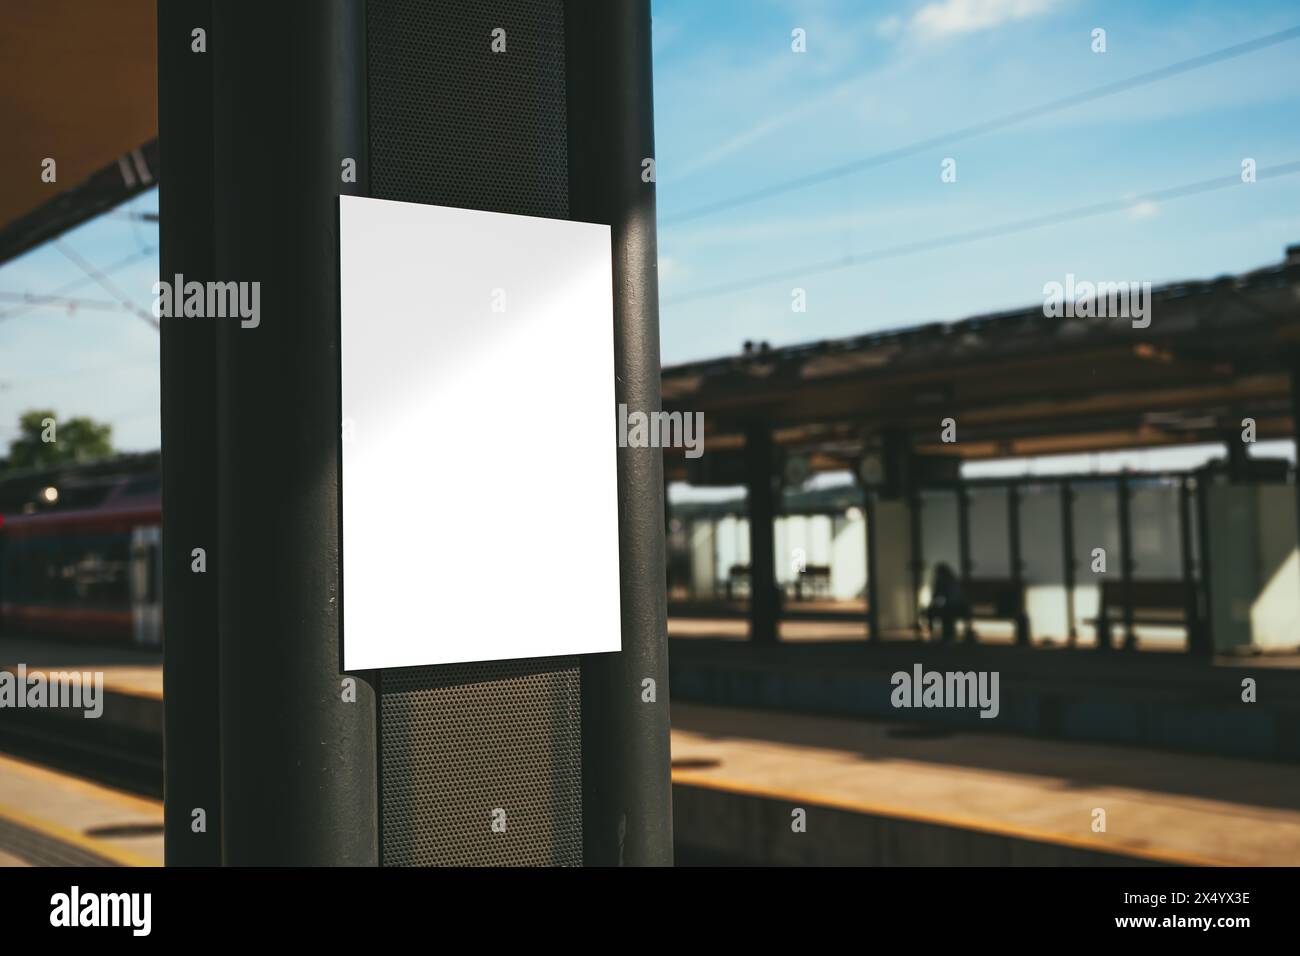 Information sign board mockup on train station, selective focus Stock Photo